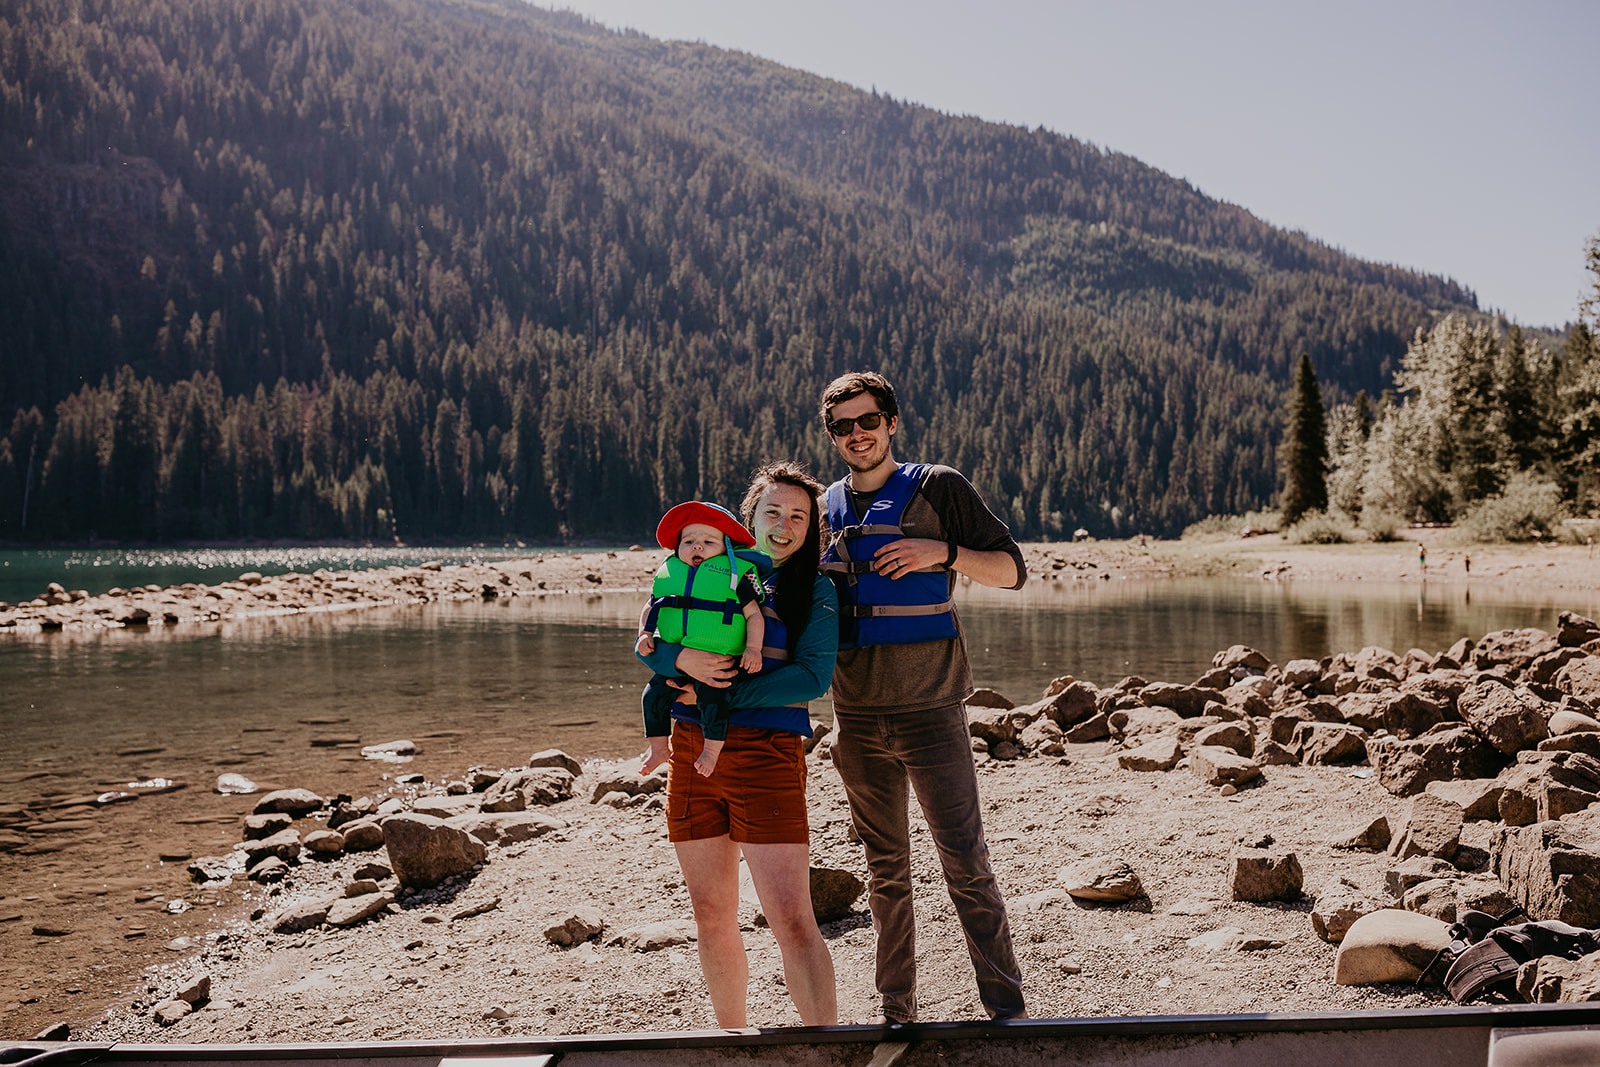 kachess-lake-camping-family-portraits-megan-gallagher-photography_(305_of_335).jpg